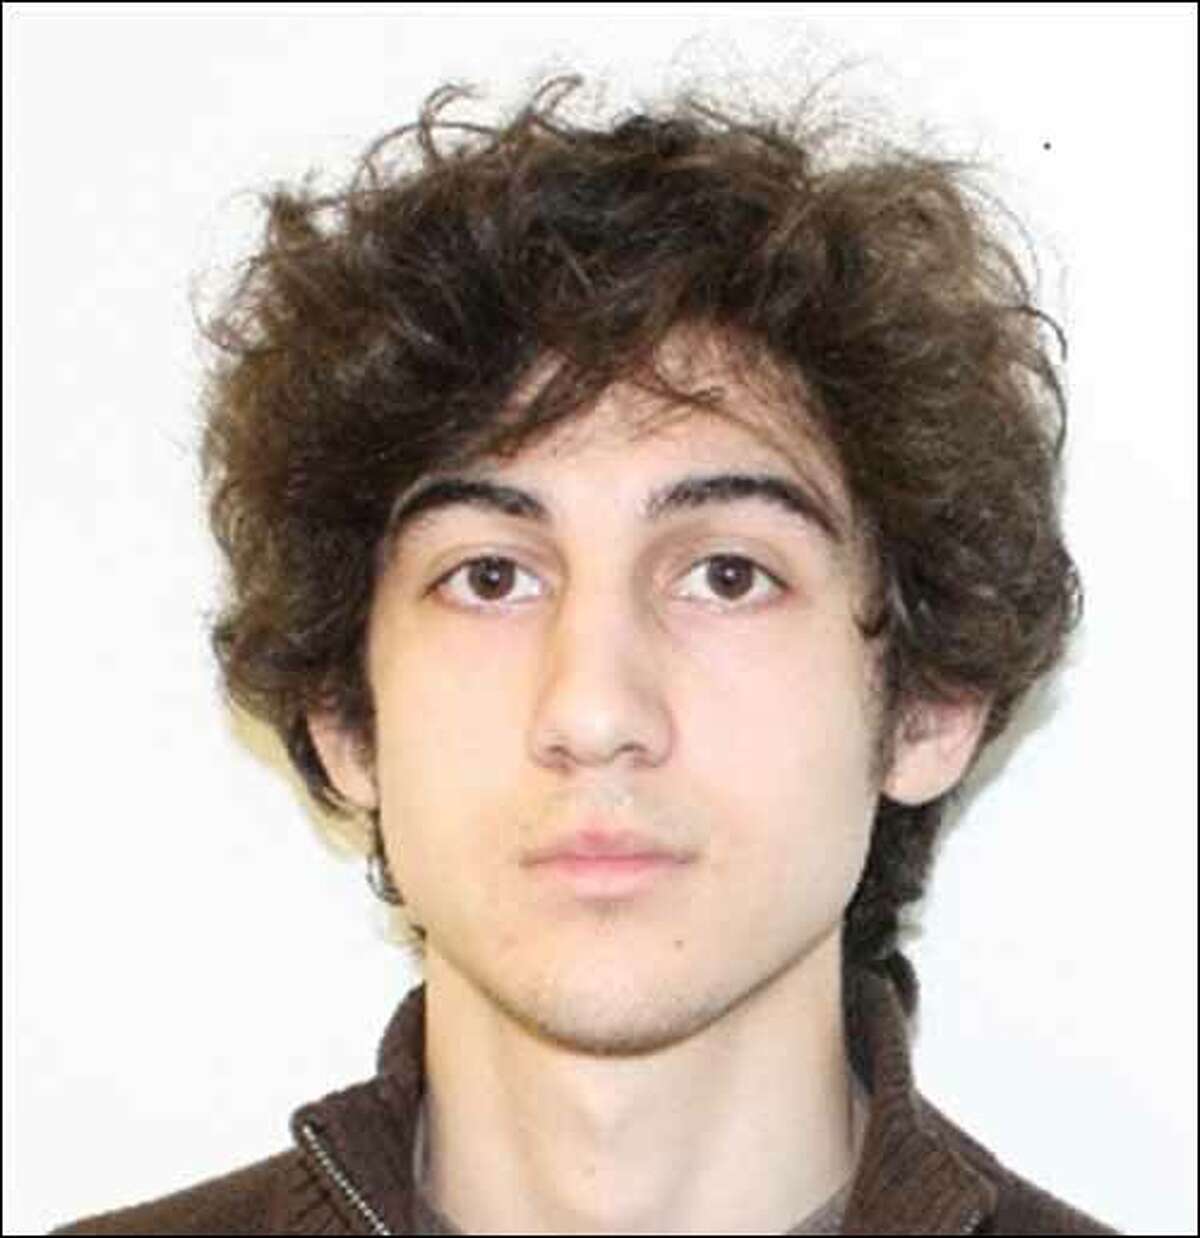 FBI released a new photo Friday morning of Suspect 2 in the Boston Marathon bombings.